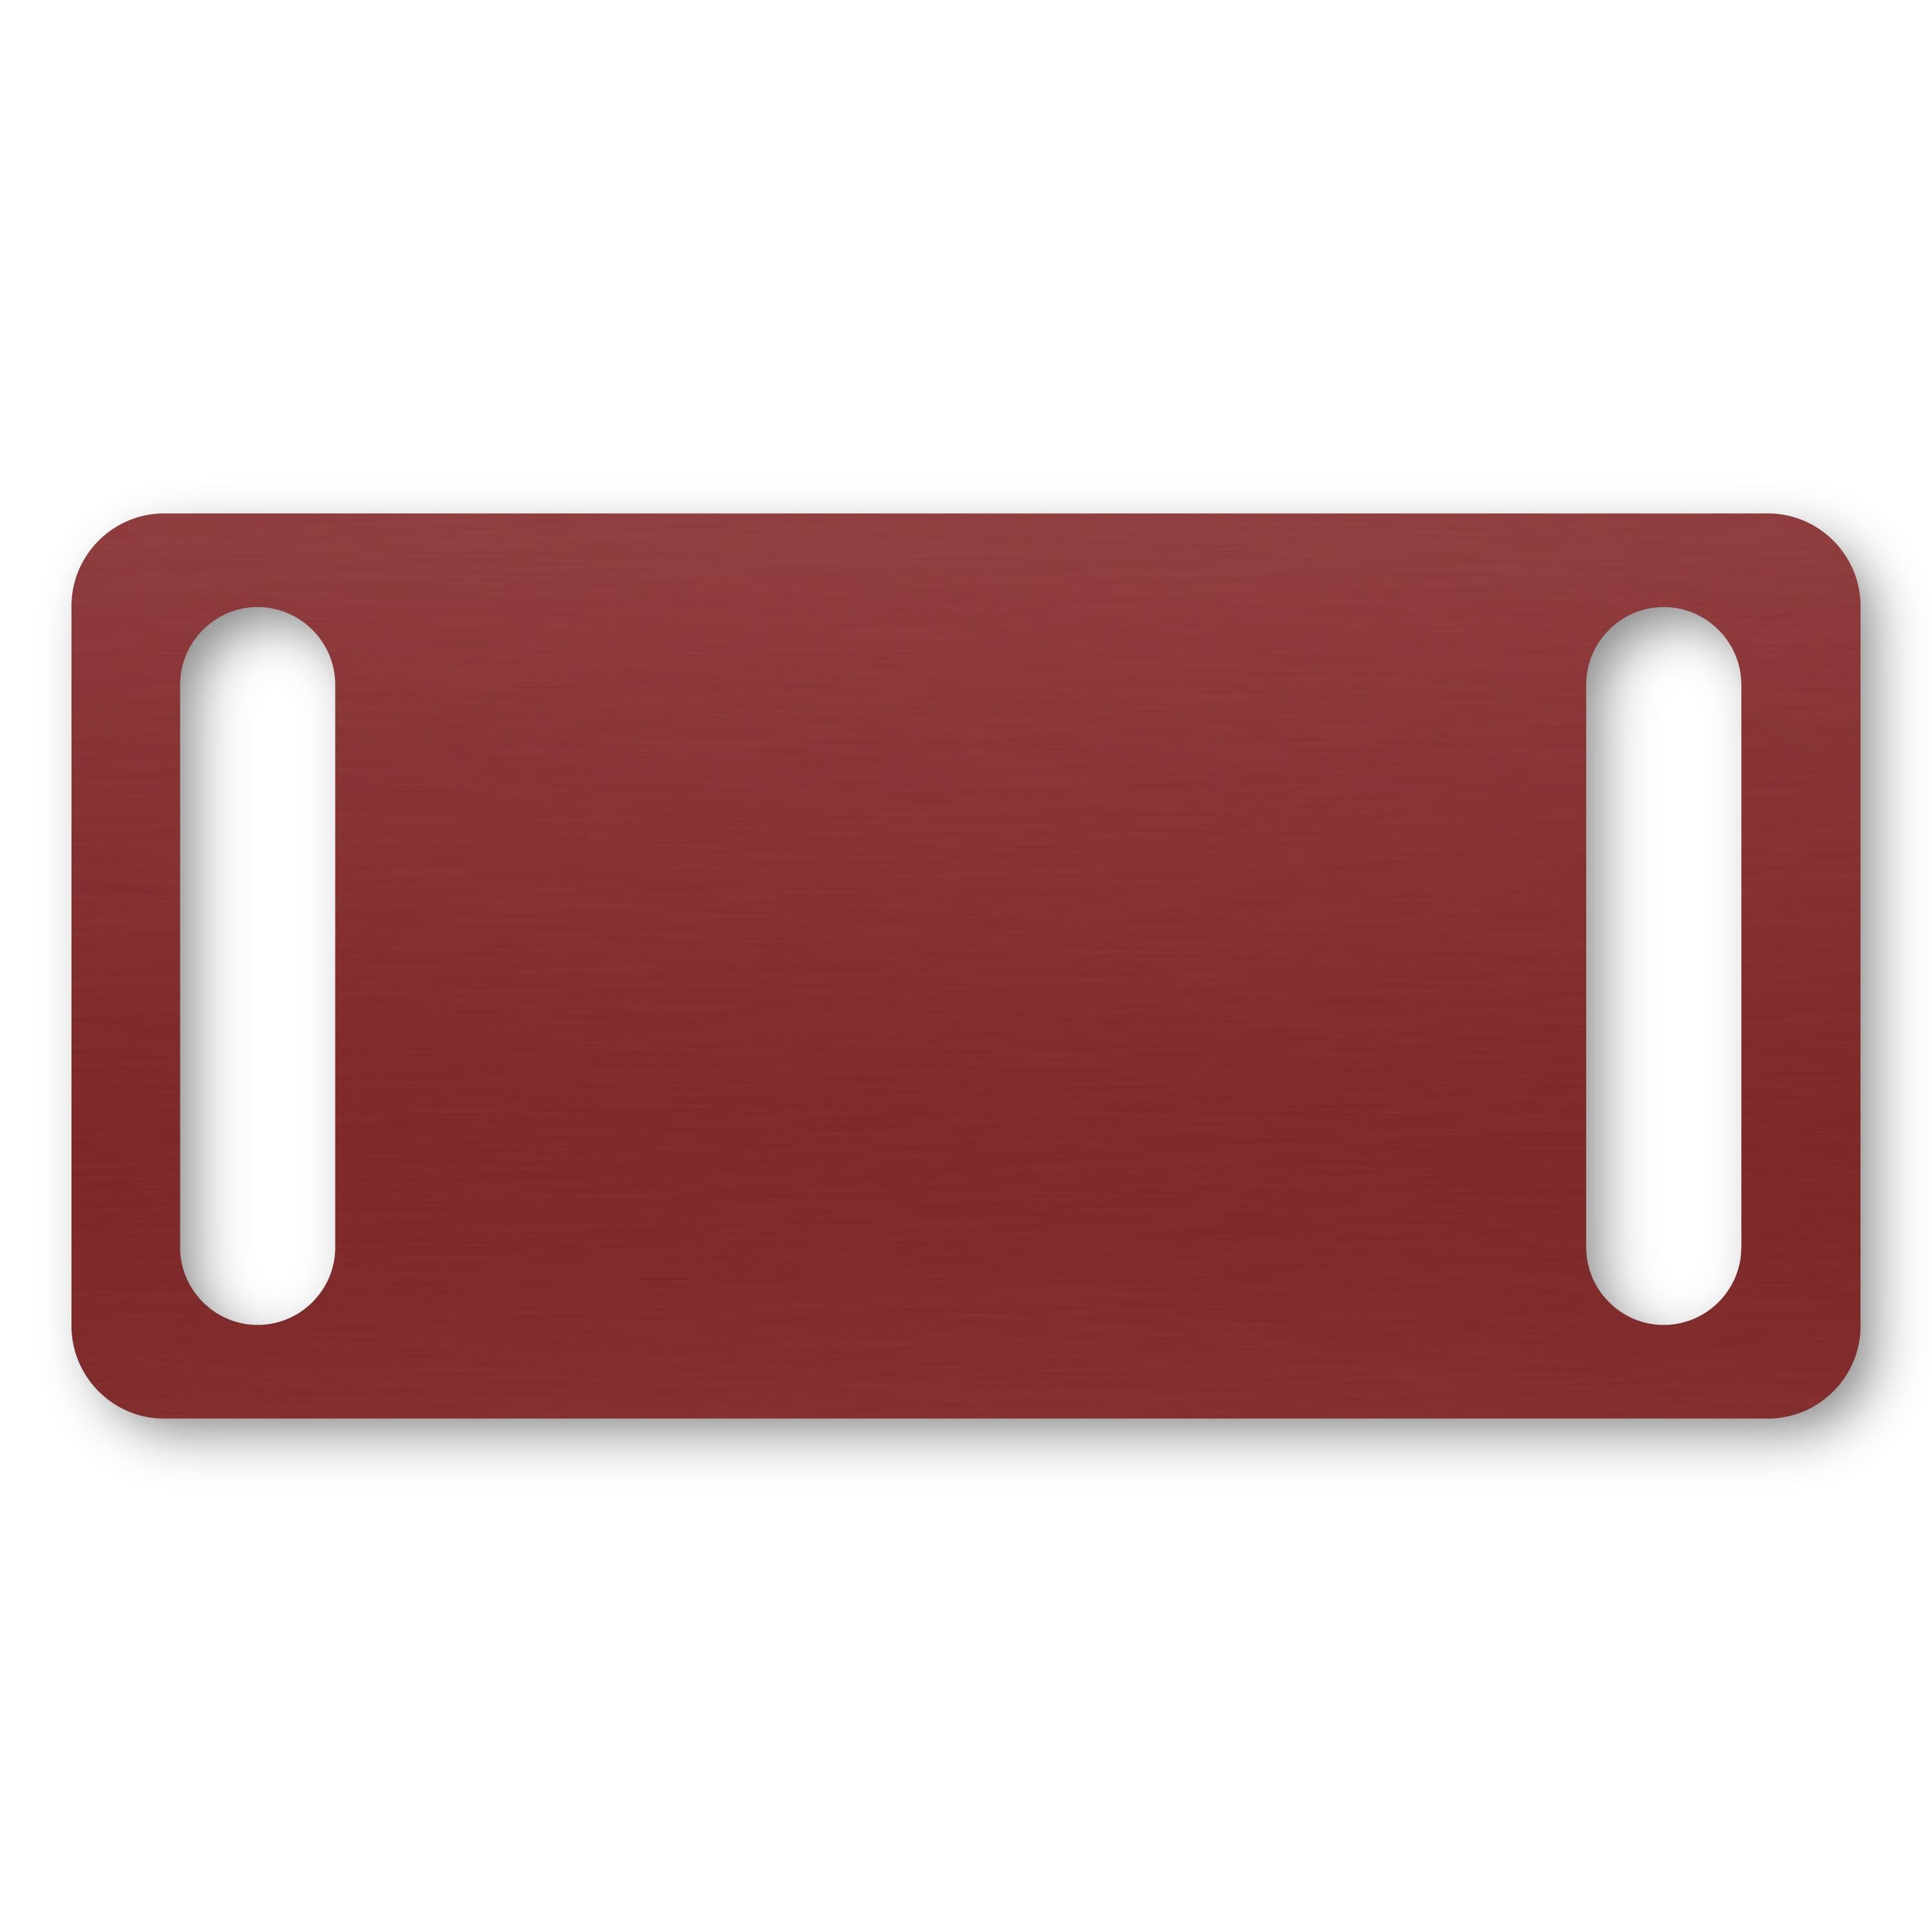 Anodized Aluminum Rectangle Slide-On Tags, 1-3/16" x 2" with 1/4" x 1" Slot, Laser Engraved Metal Tags Craftworks NW Red 